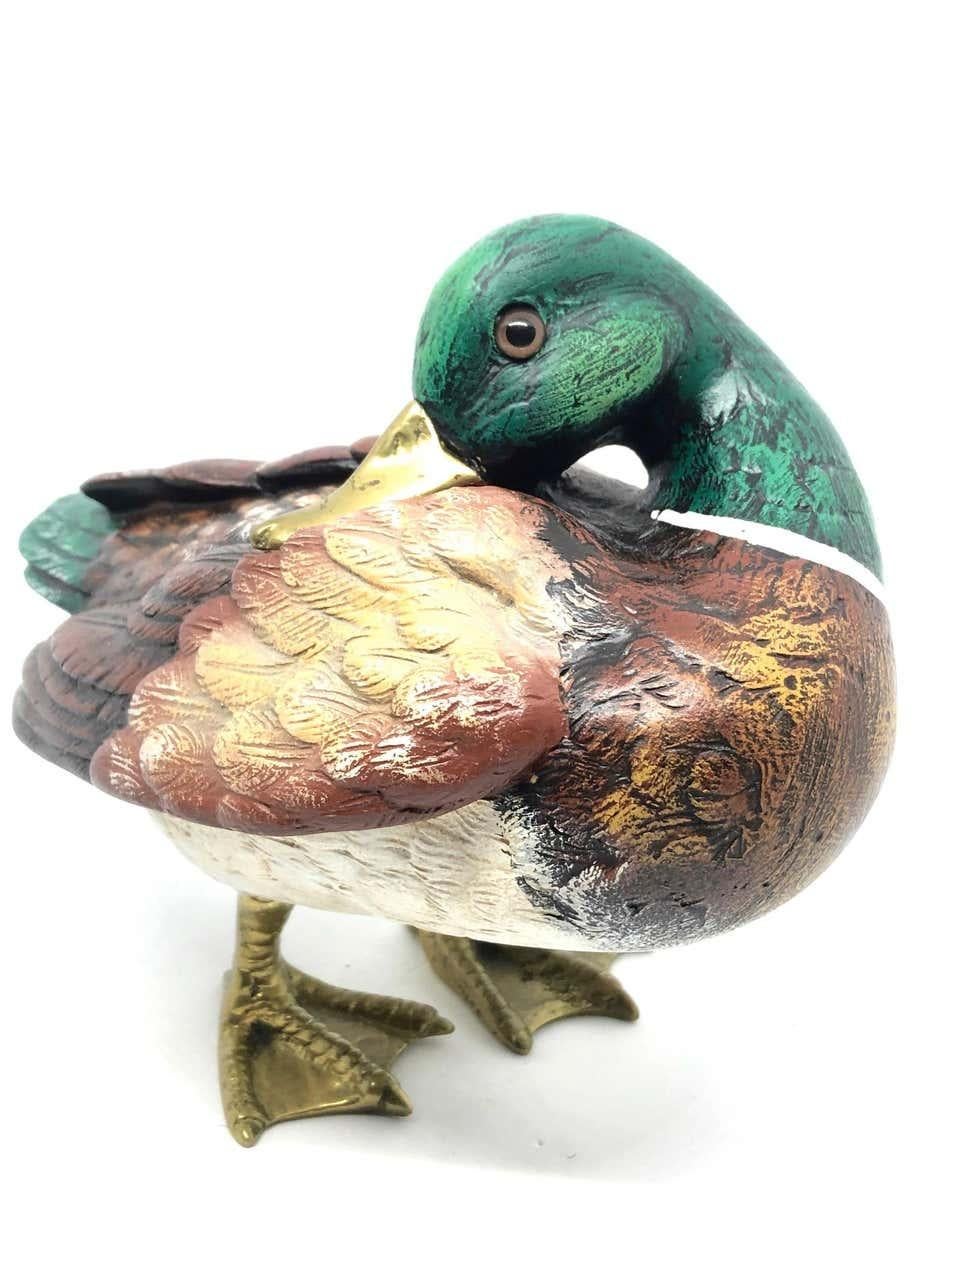 Vintage signed duck figurine by Elli Malevolti. It features a decoy type design with brass accented parts. It has glass eyes and a hand painted body. A nice addition to the Hollywood Regency interior. Signed Malevolti Italy.